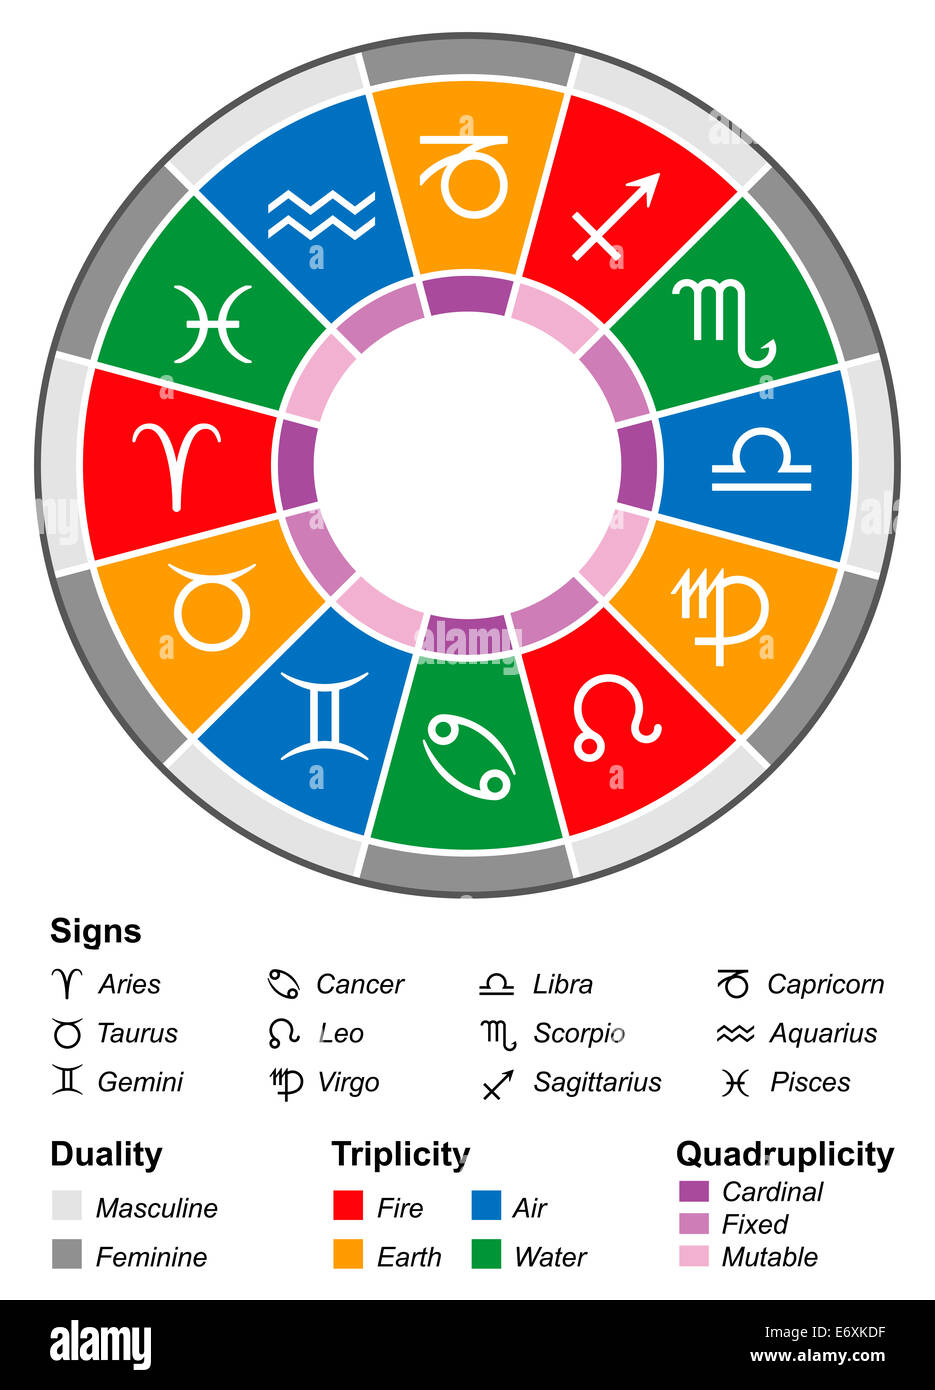 12 Signs Of Zodiac In Details And Their Corresponding Traits Figures ...